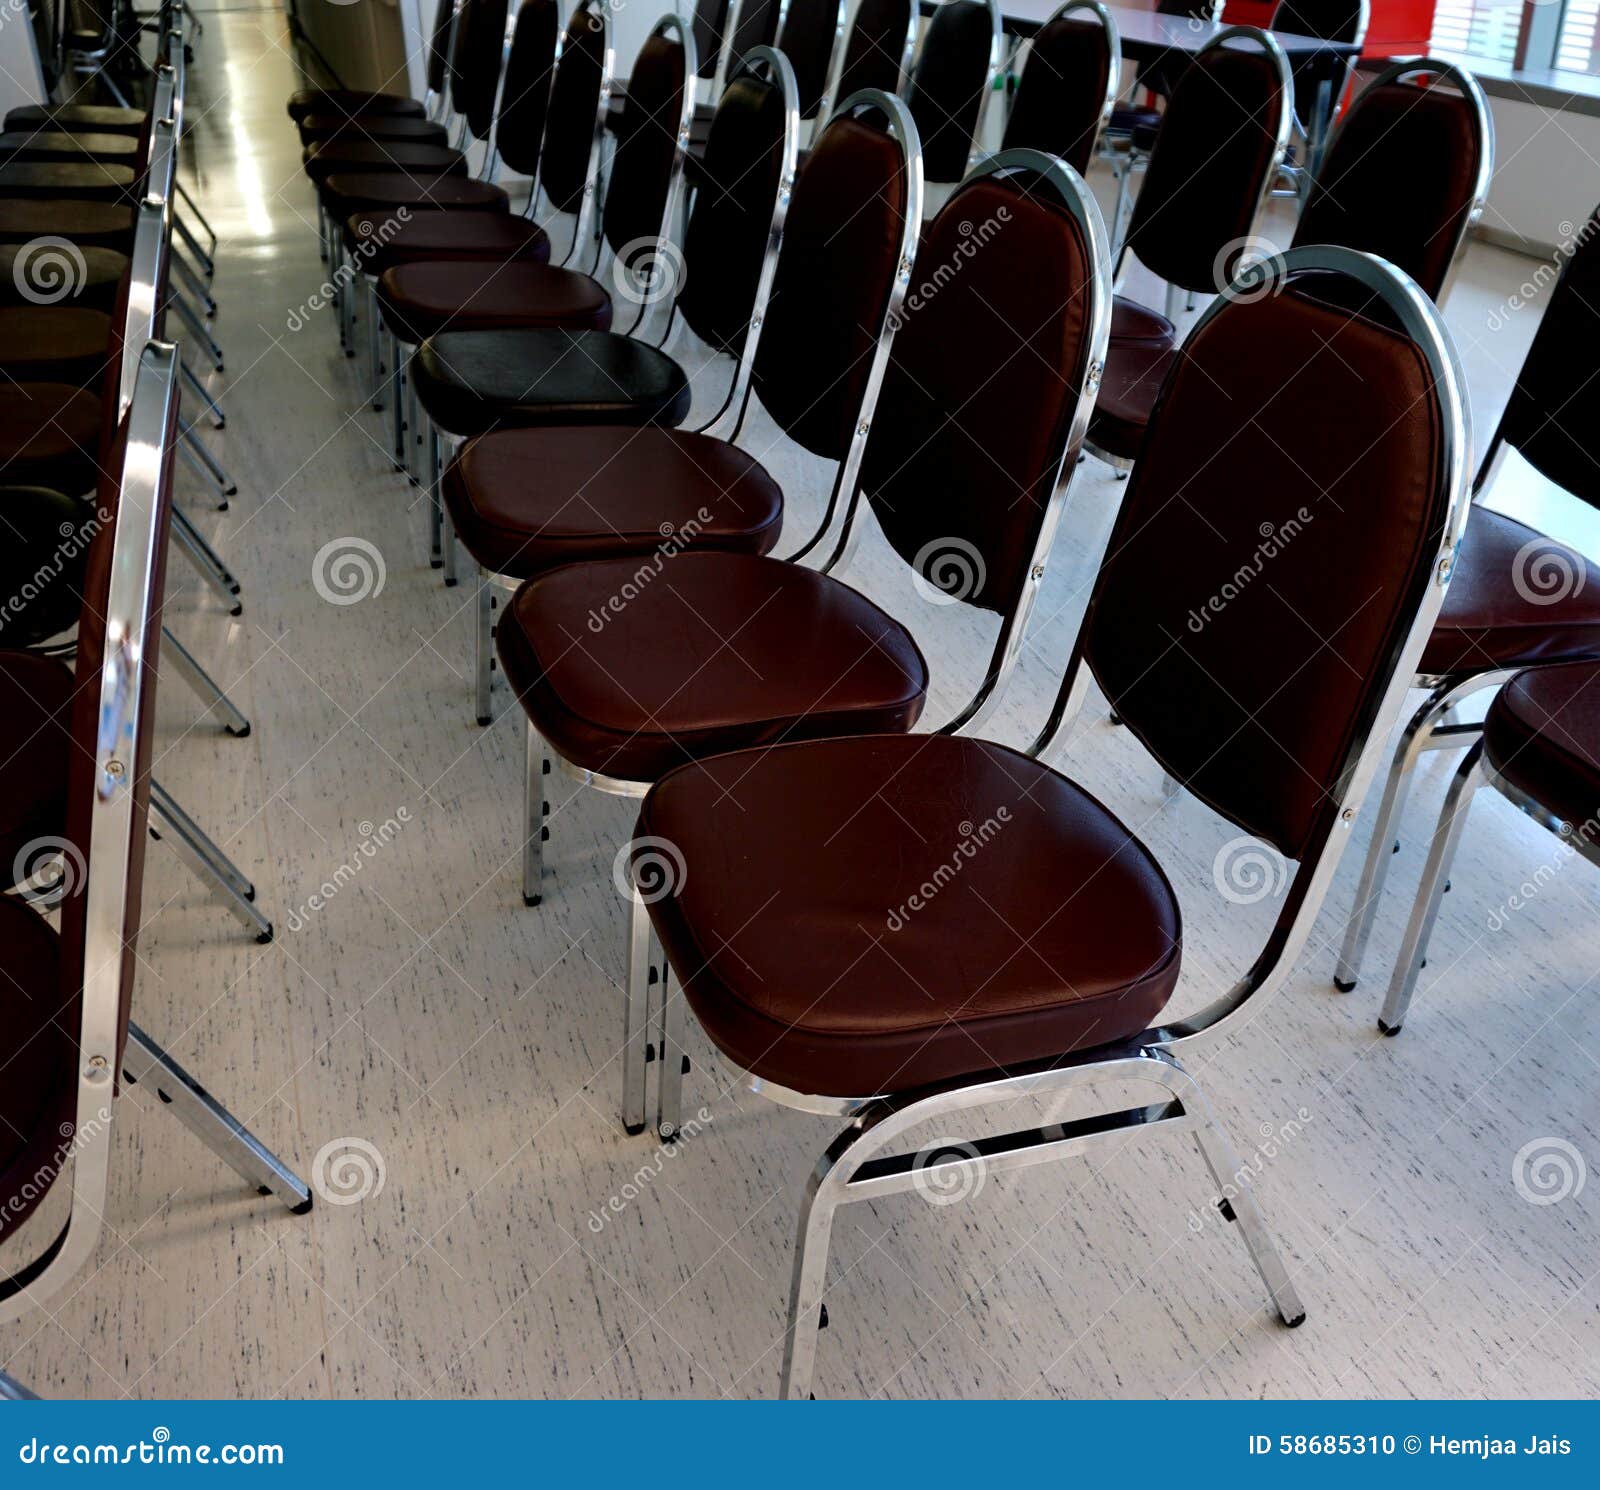 chairs in siminar room